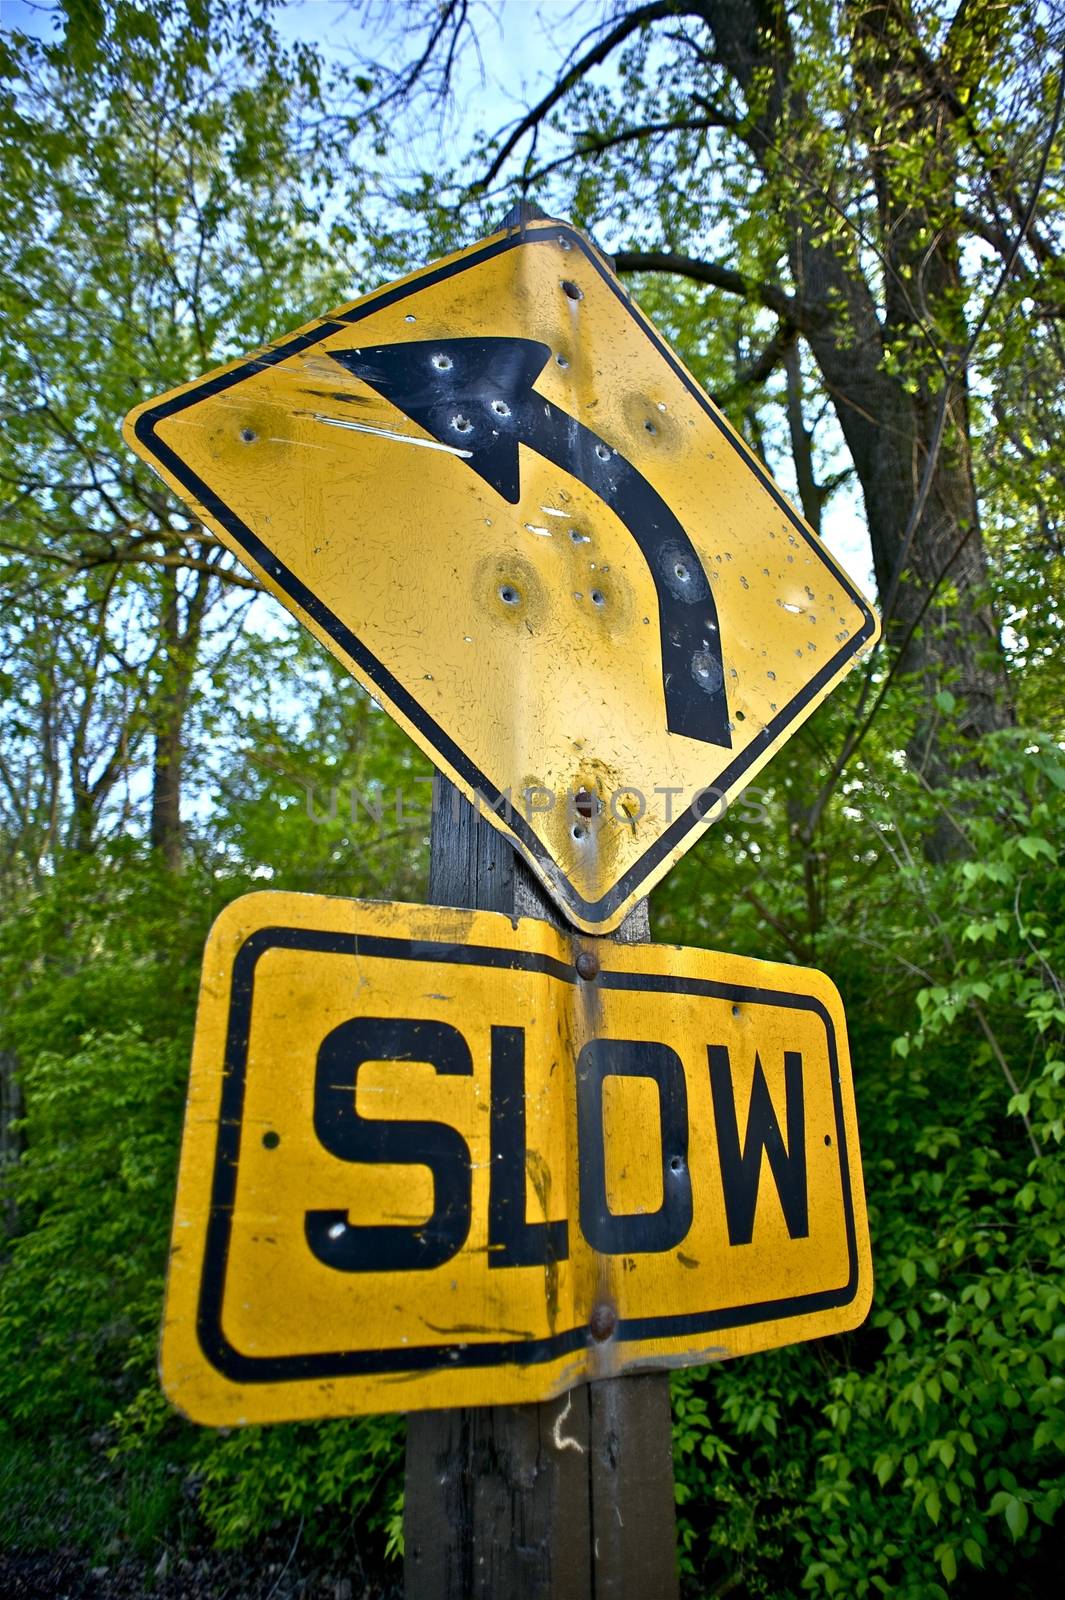 Bullet Holes Slow Down Sign Somewhere in the Wood. Damaged by Bullets Yellow Traffic Sign. Transportation Photo Collection